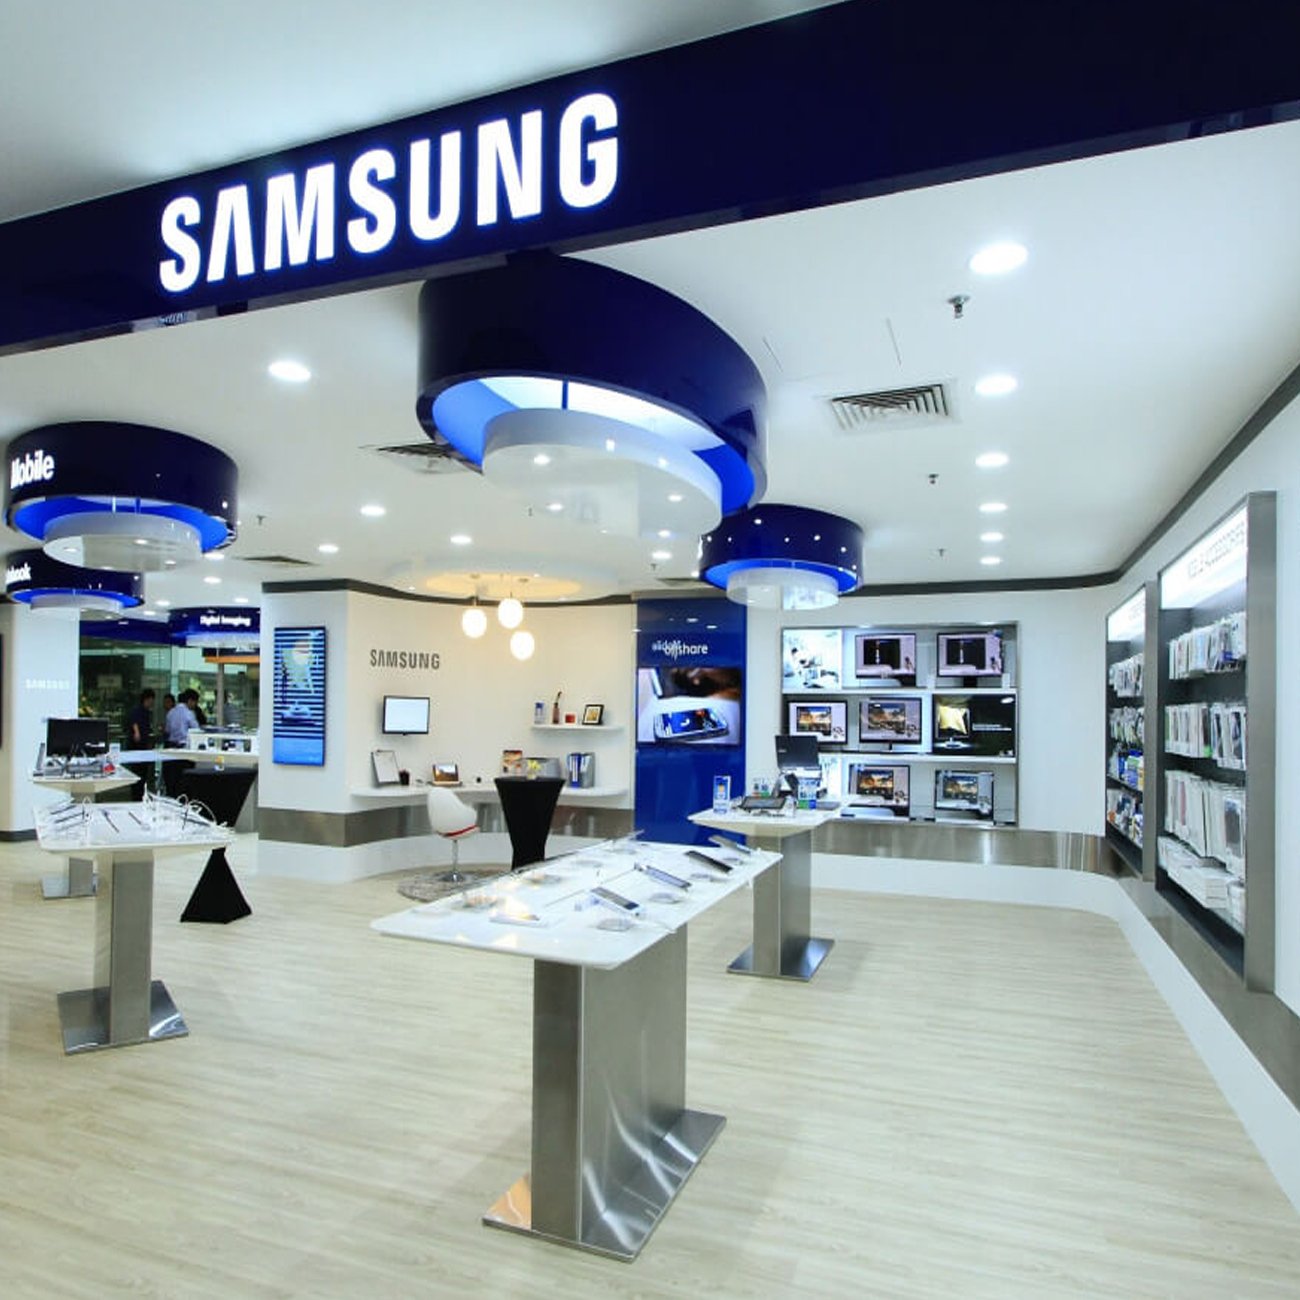 (UPDATED) Samsung Stores in the Baltic States Still Don’t Accept Cryptocurrencies